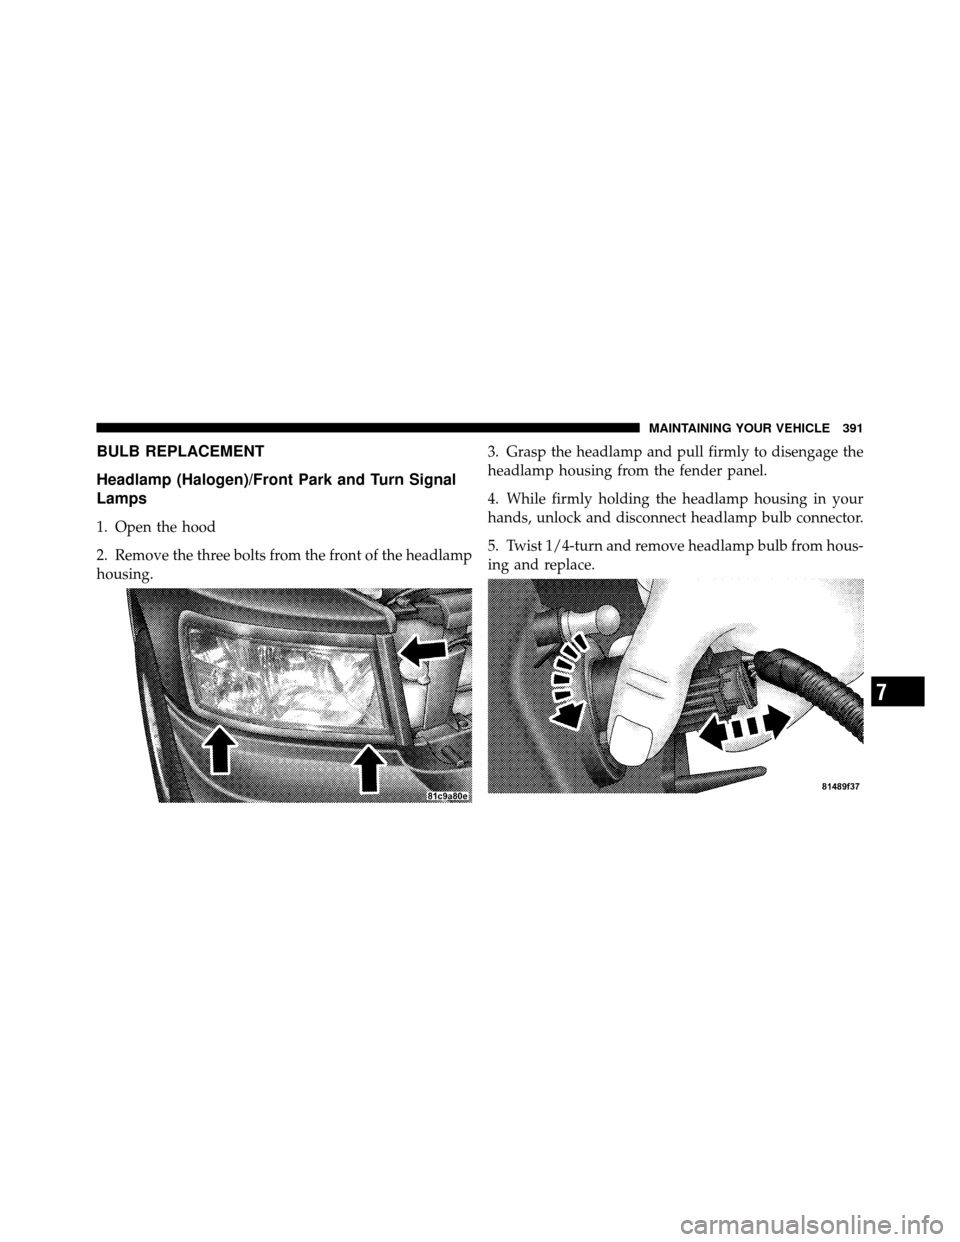 DODGE DAKOTA 2010 3.G User Guide BULB REPLACEMENT
Headlamp (Halogen)/Front Park and Turn Signal
Lamps
1. Open the hood
2. Remove the three bolts from the front of the headlamp
housing.3. Grasp the headlamp and pull firmly to disengag